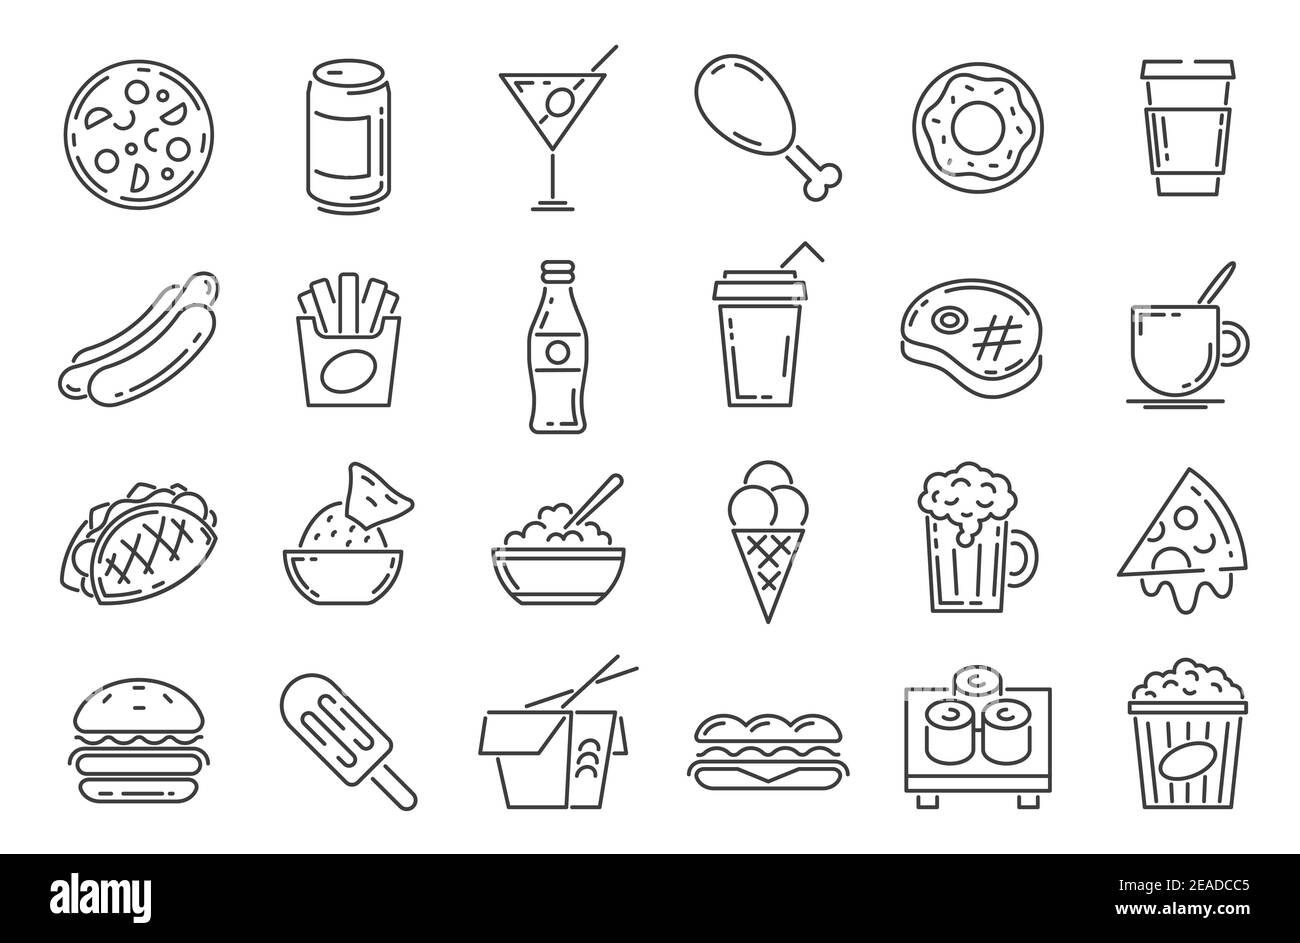 Fast food line icons. Cafeteria snack, sandwich, drink, pizza, hamburger and hotdog. Outline takeaway dishes and cafe menu symbol vector set Stock Vector